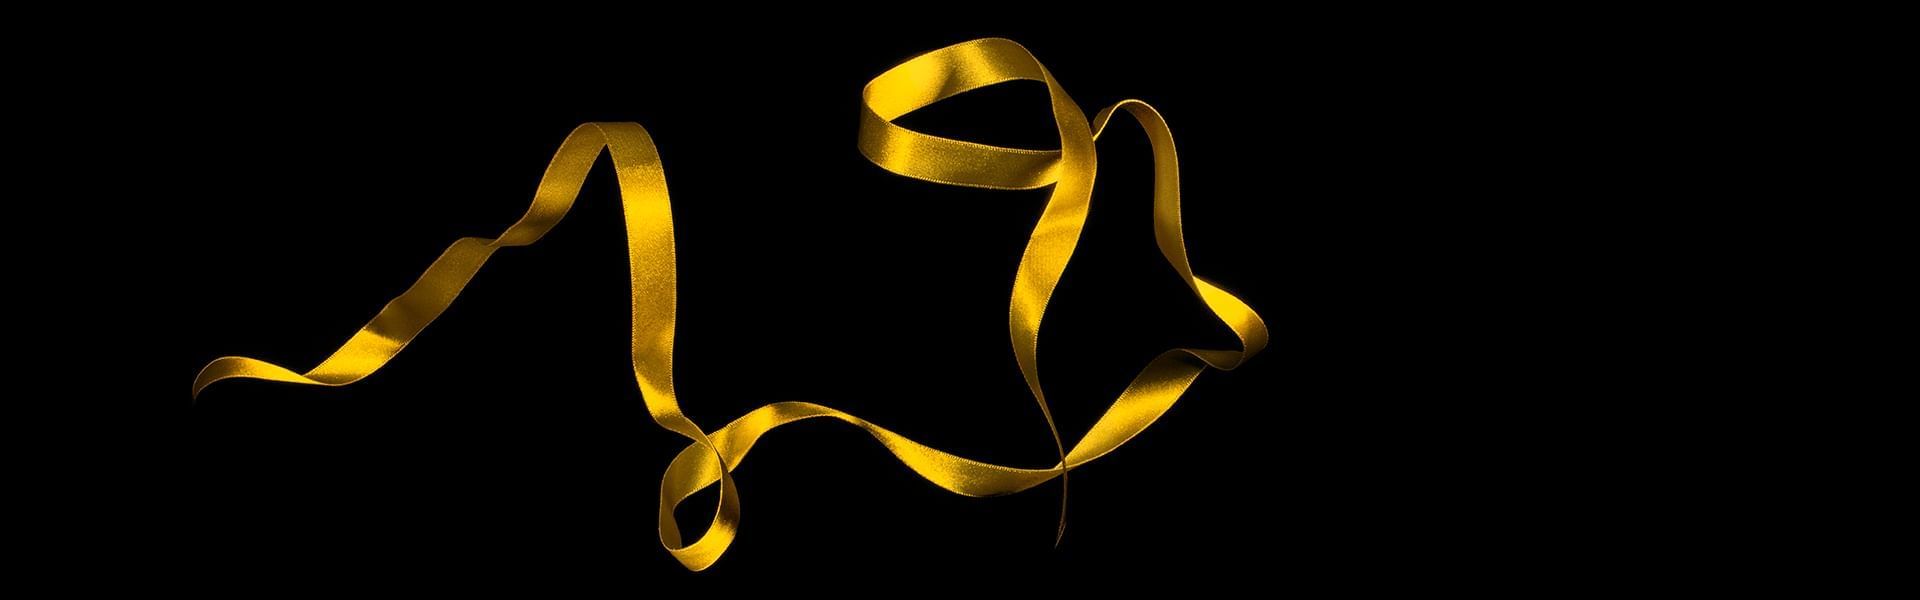 Black background image with a yellow ribbon at Crown Tower